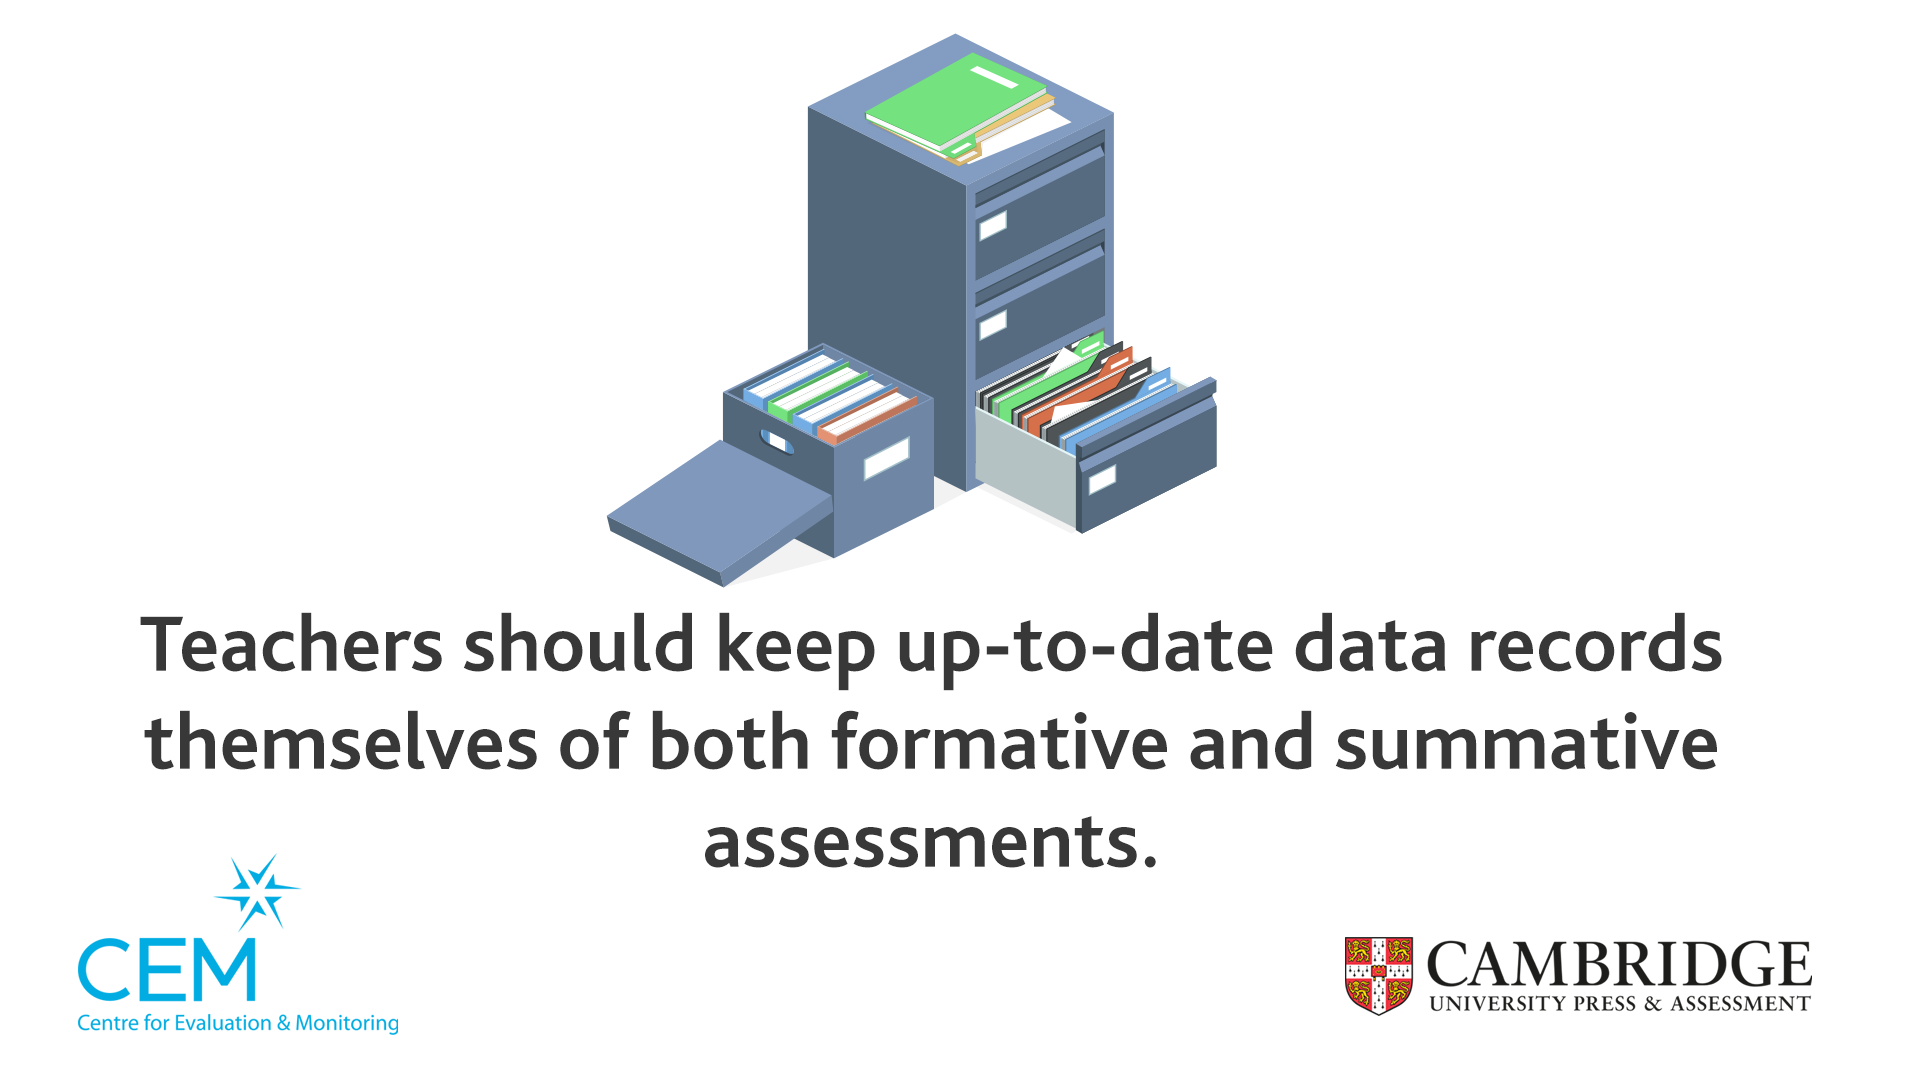 Teachers should keep up to date data records